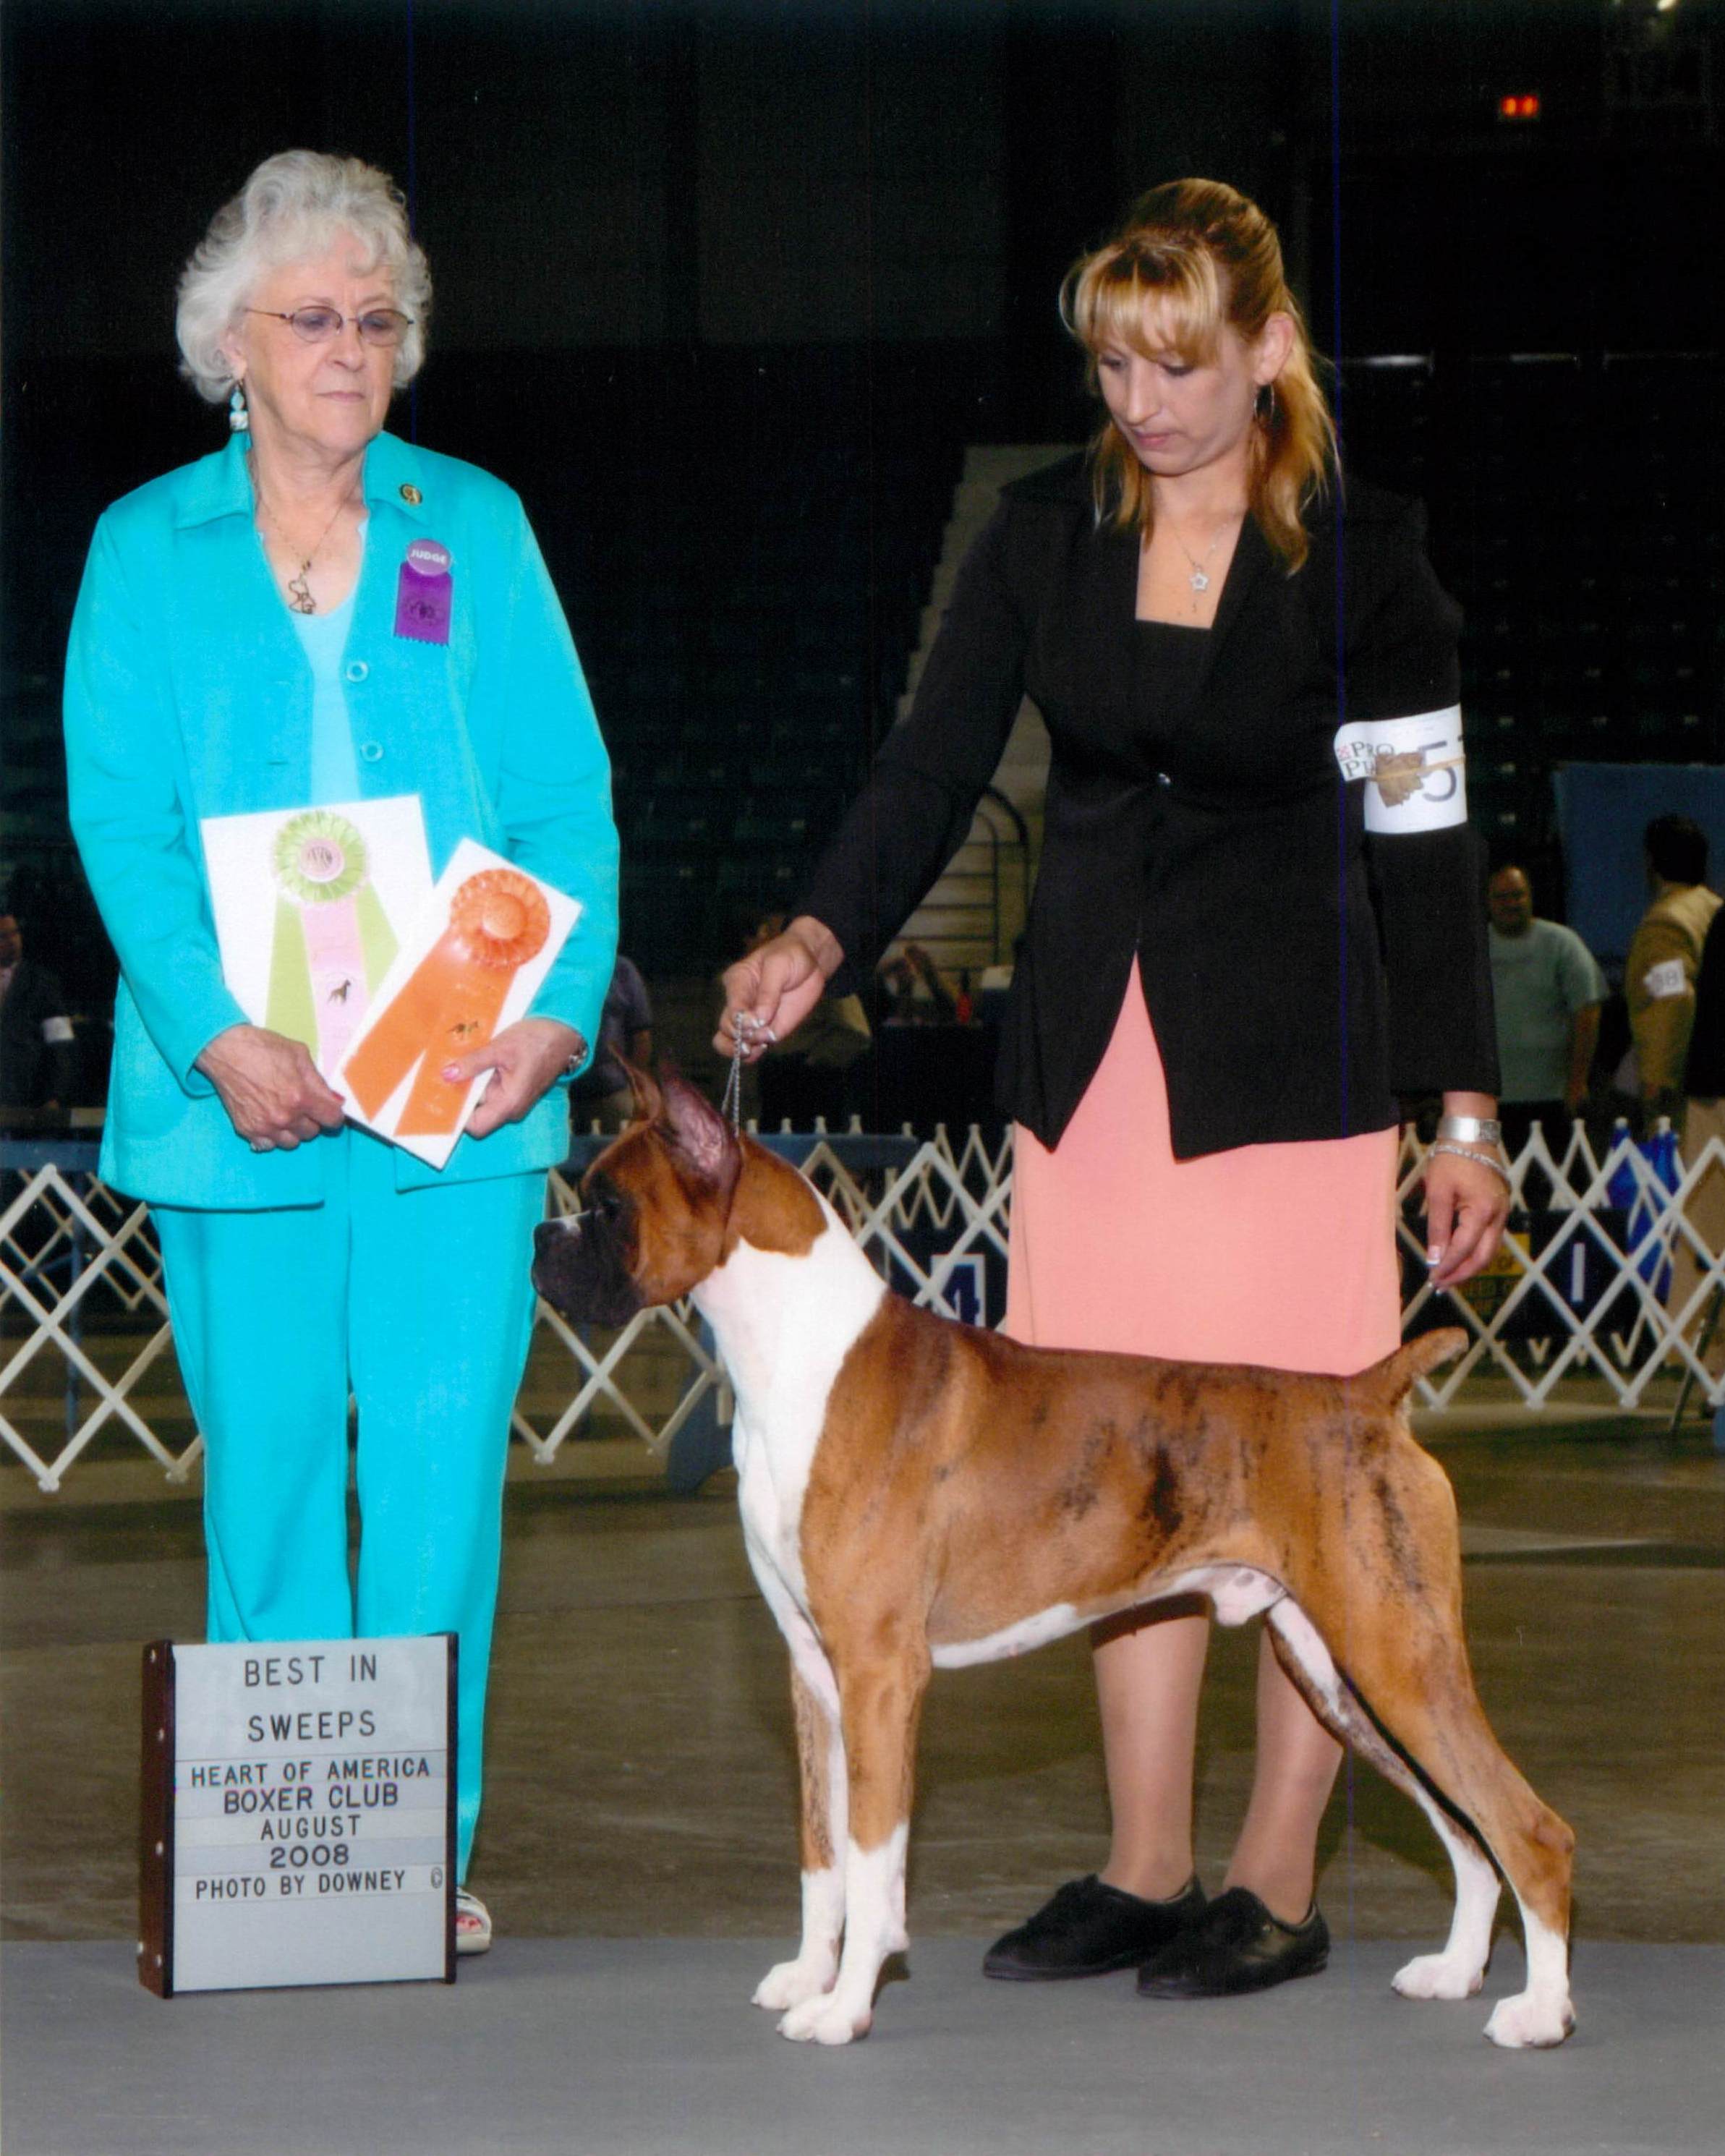 Grand Sweepstakes, Best Junior @ 2008 Specialty Show #2